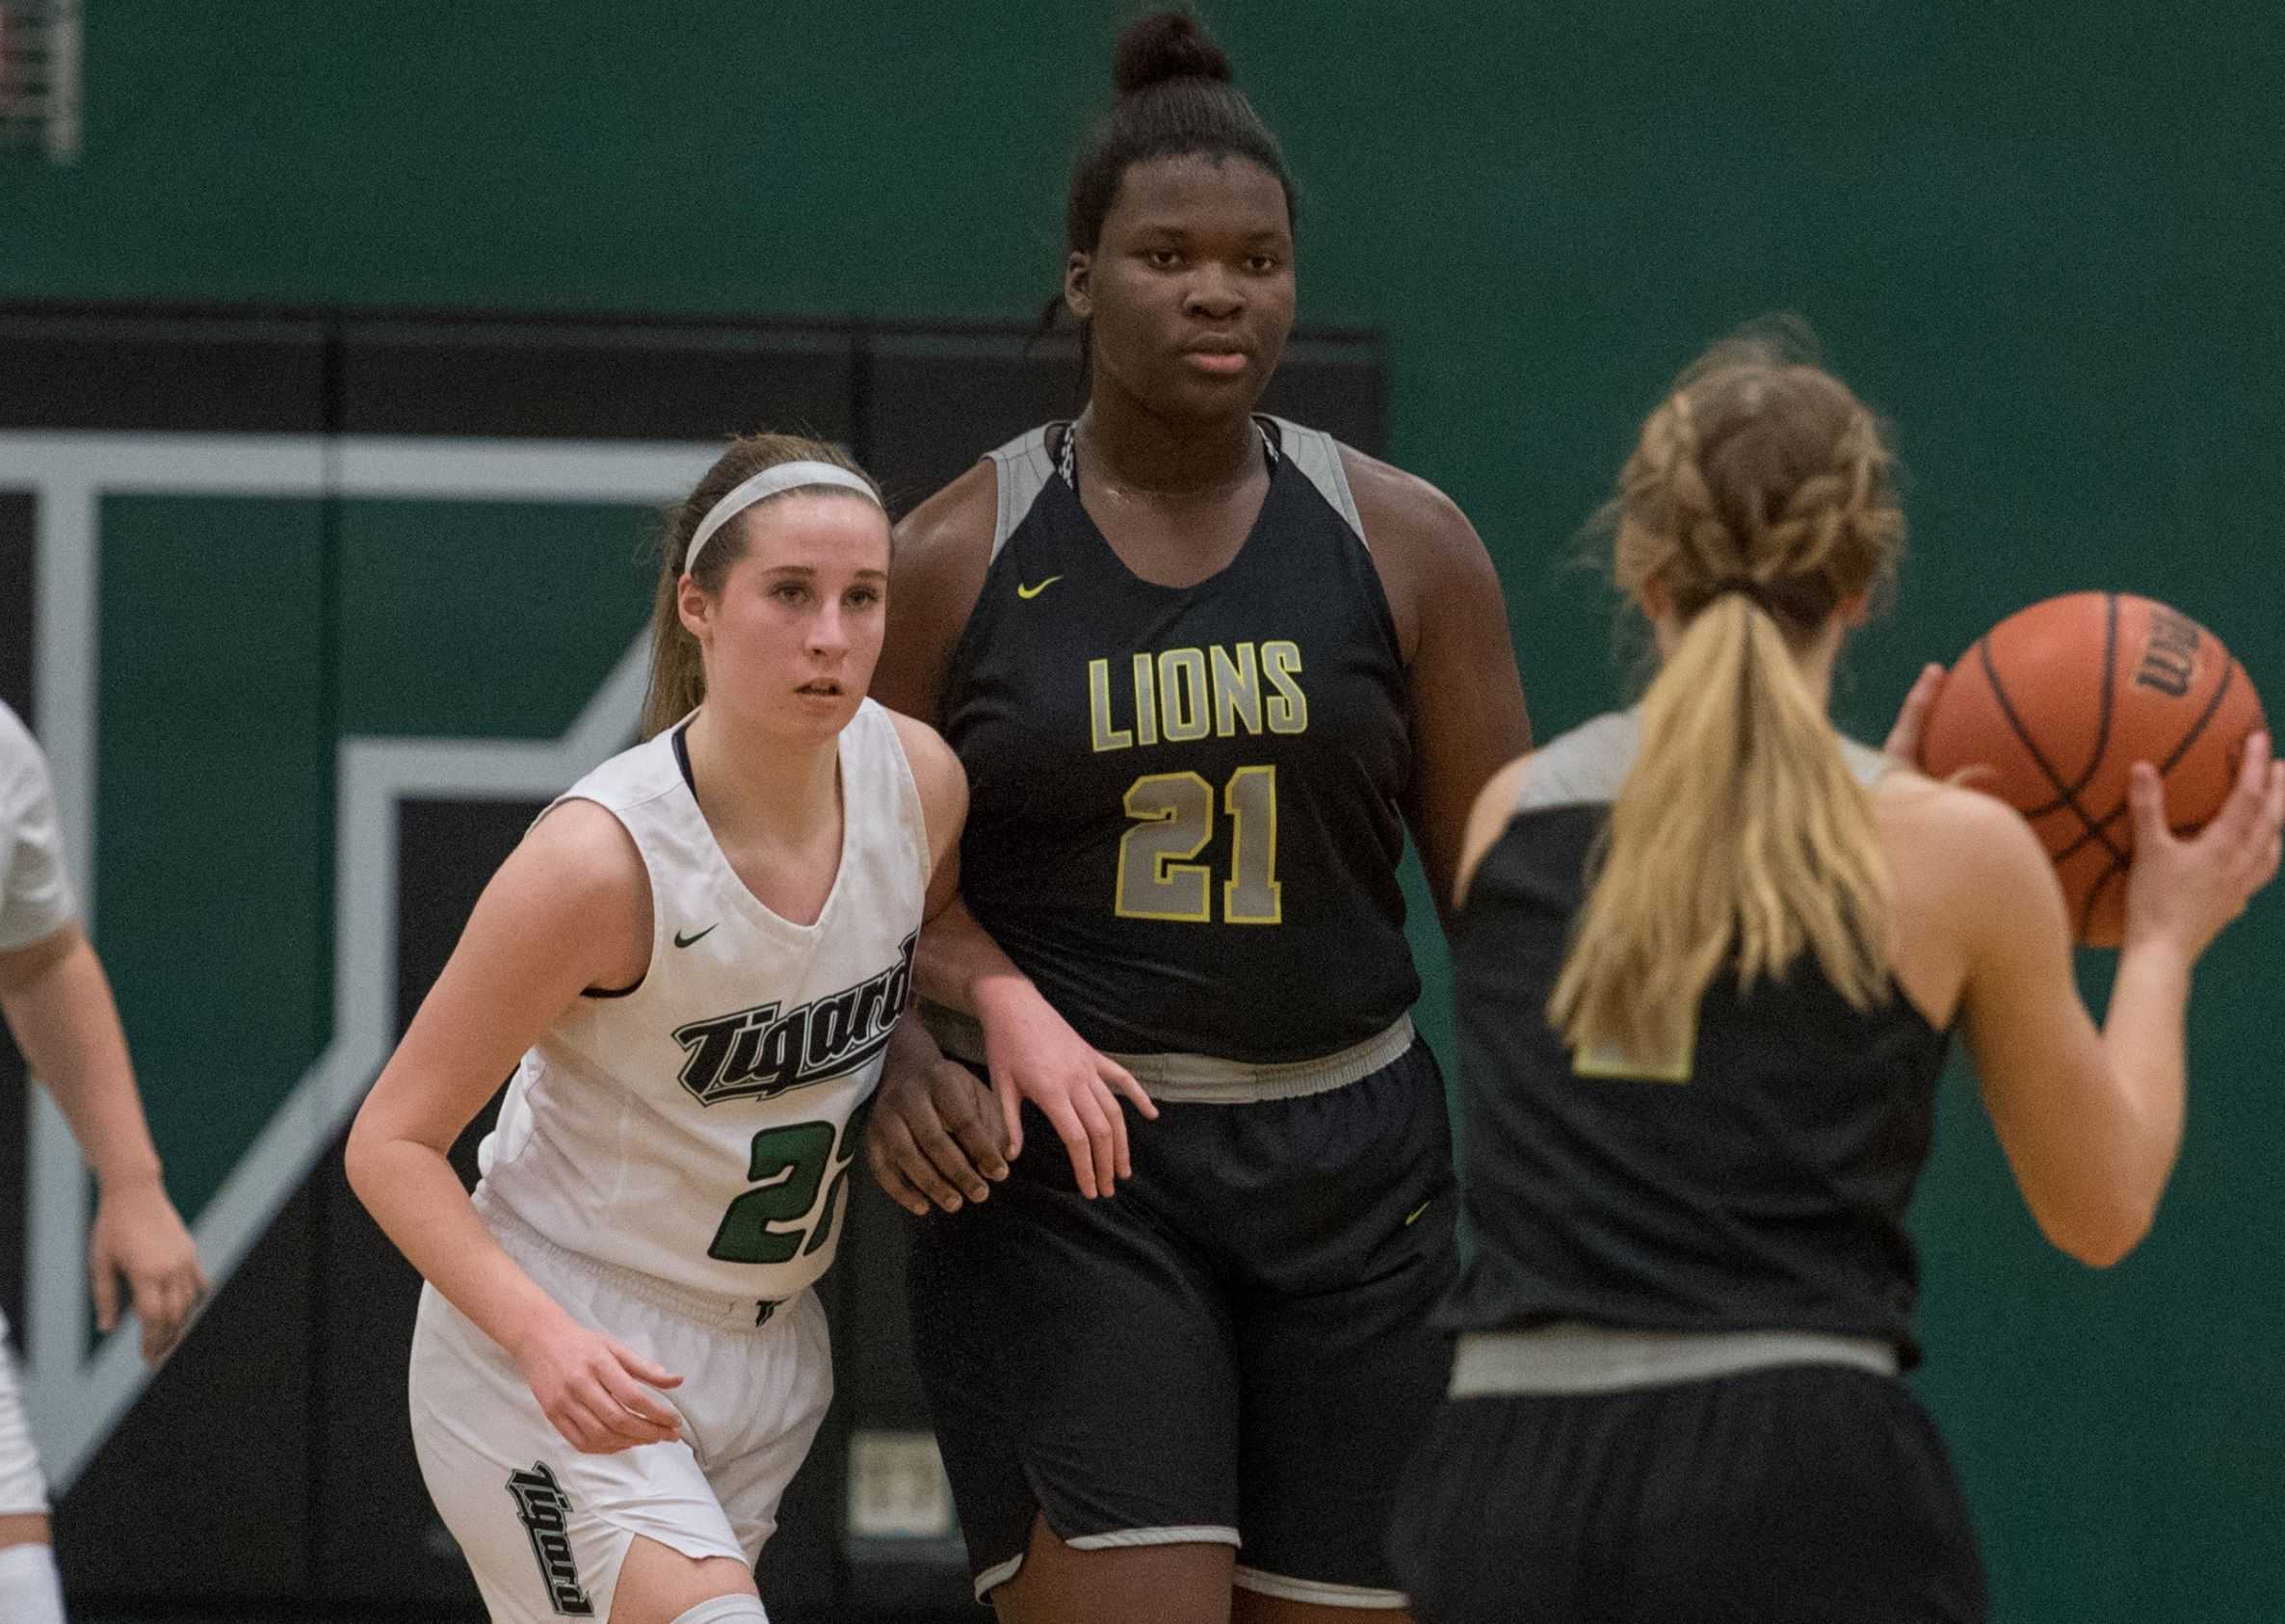 West Linn's Aaronette Vonleh (21) averaged 17.1 points to lead her team to a league title last season. (Photo by Ralph Greene)